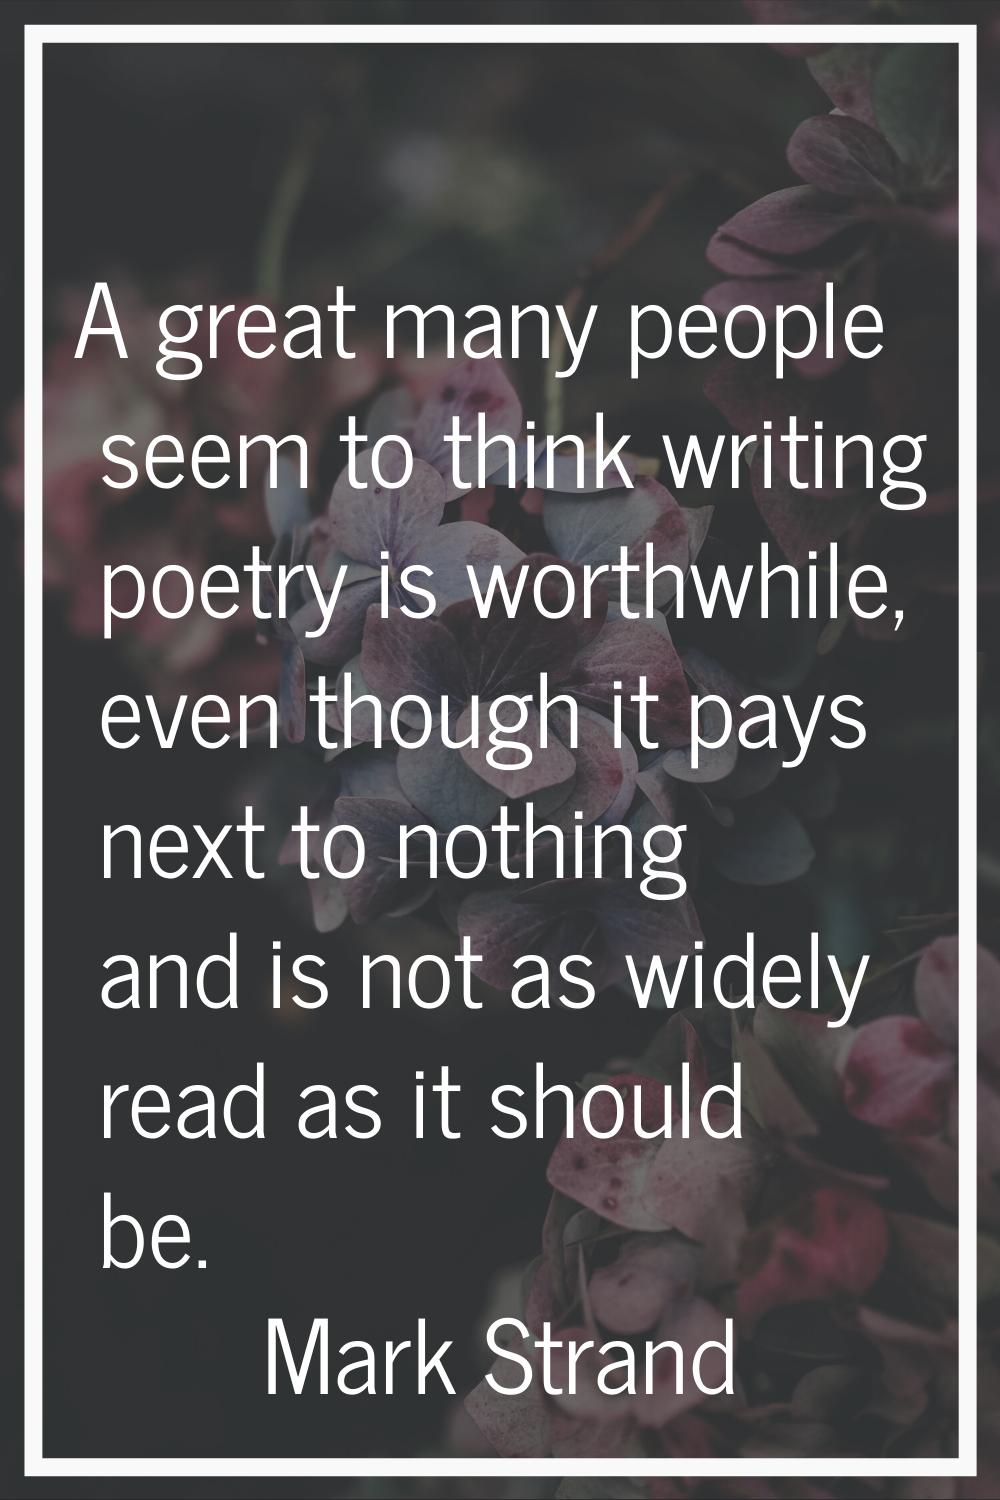 A great many people seem to think writing poetry is worthwhile, even though it pays next to nothing